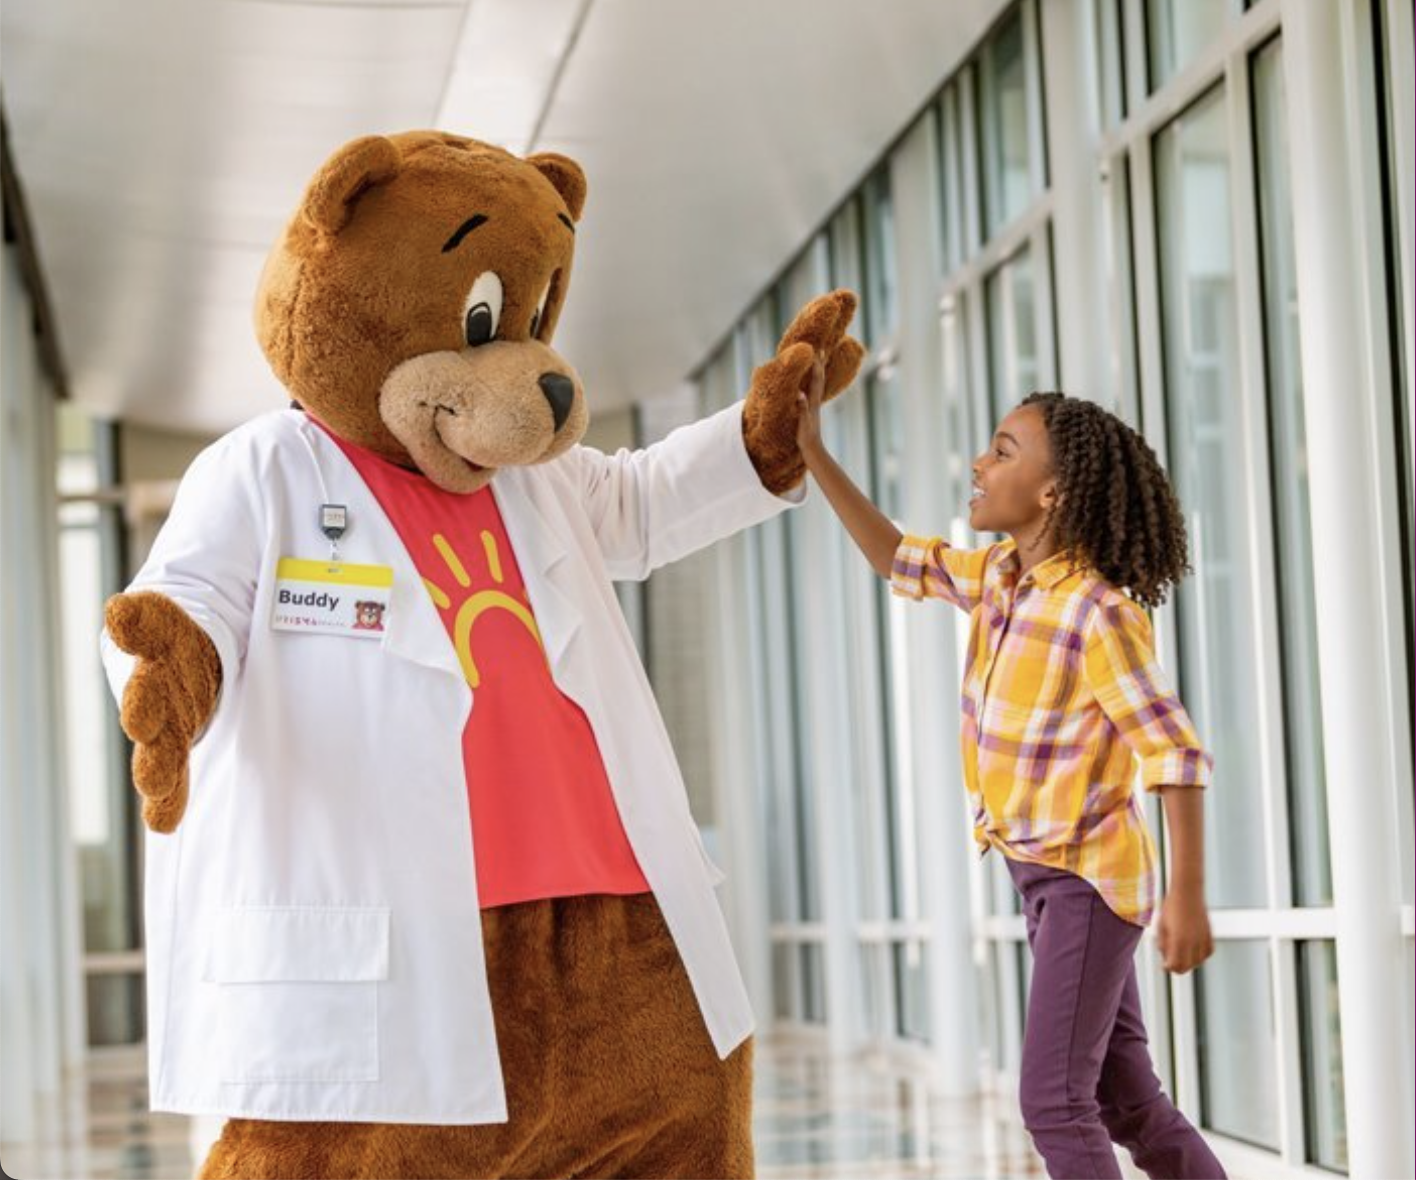 Child high-fiving Buddy the bear (costume)